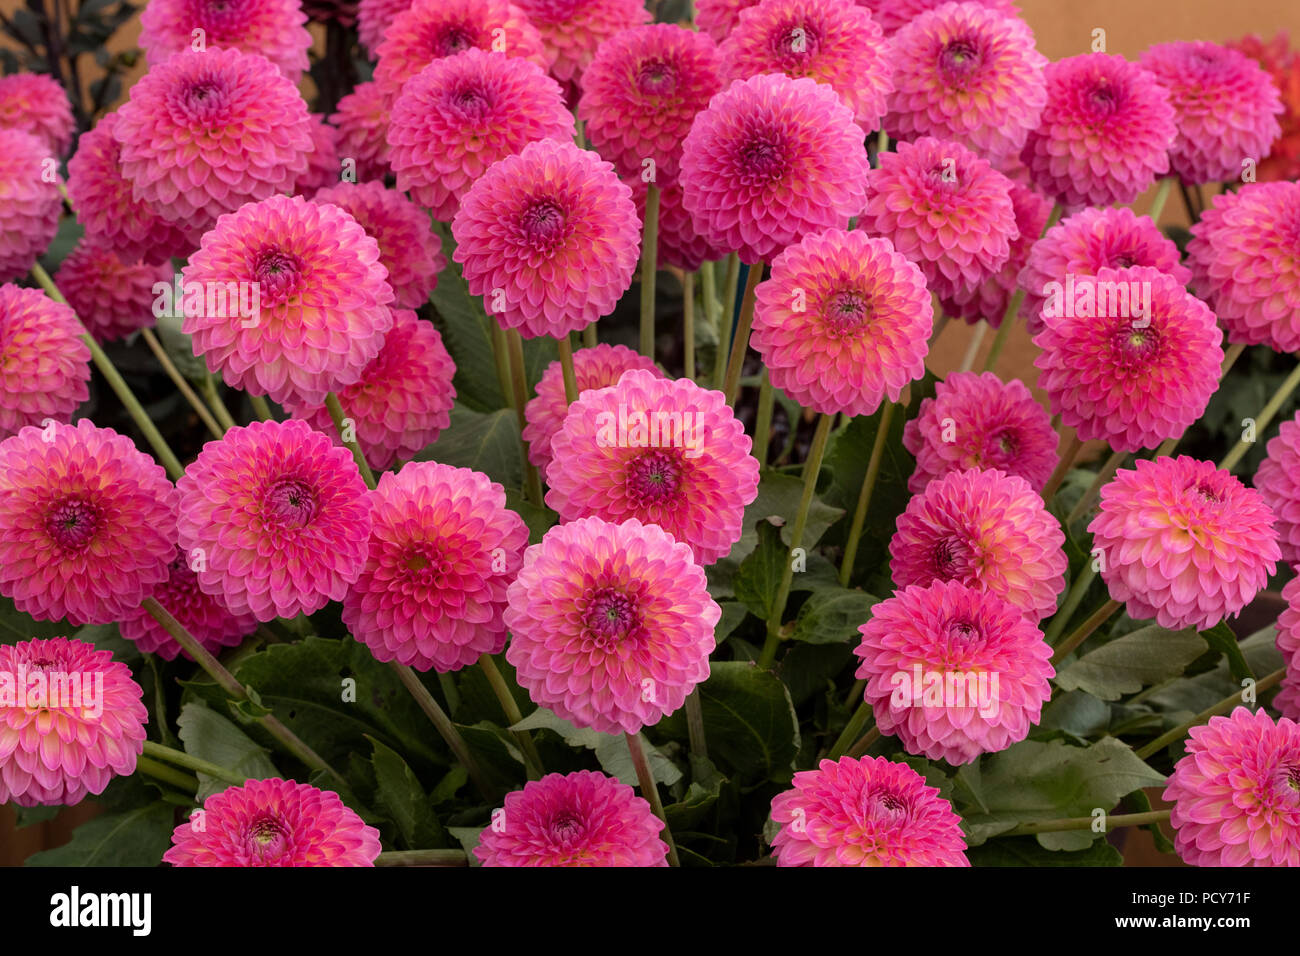 Dahlia ‘Pink Suffusion' flowers. Small Decorative Dahlia dahlias on display at a flower show. UK Stock Photo